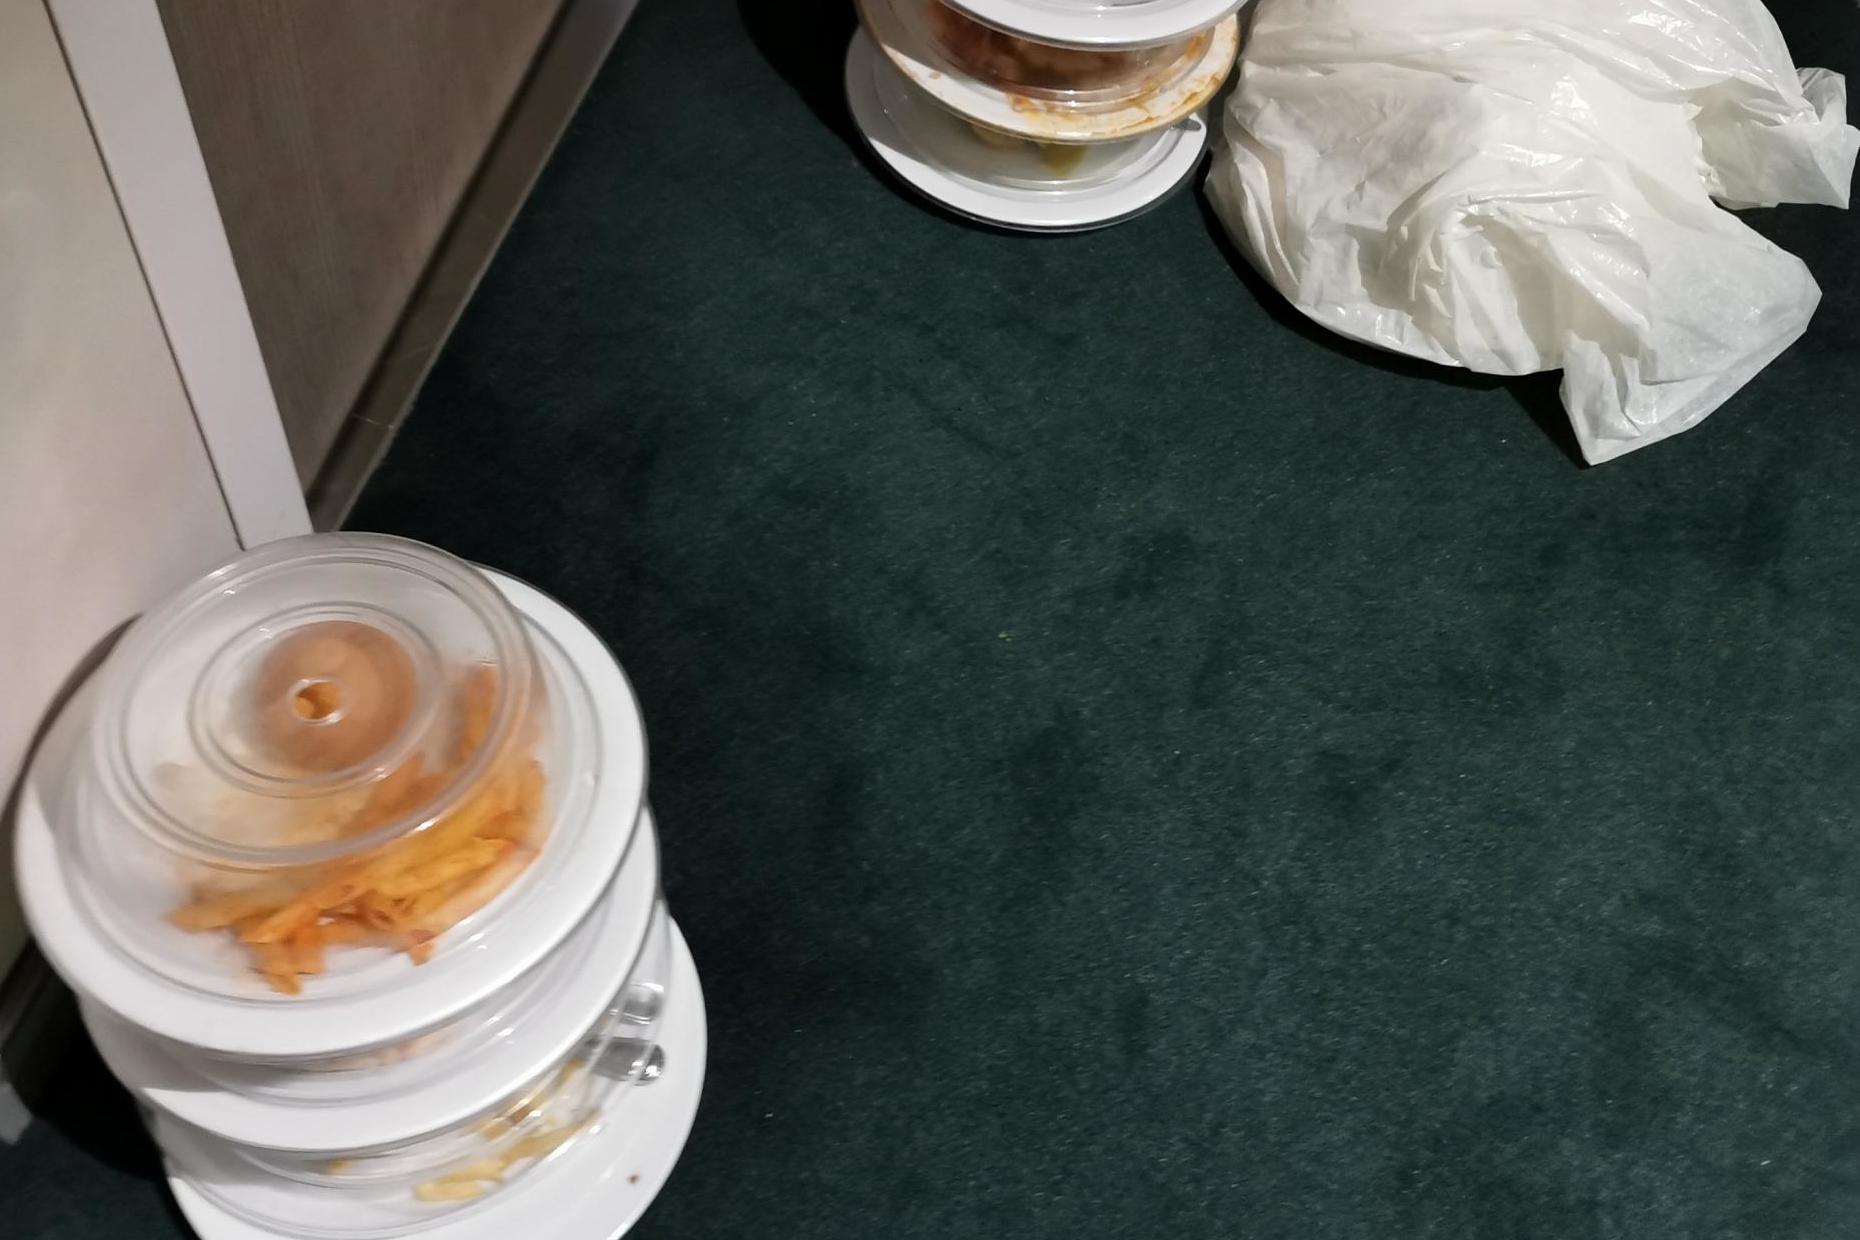 Dirty plates pile up onboard